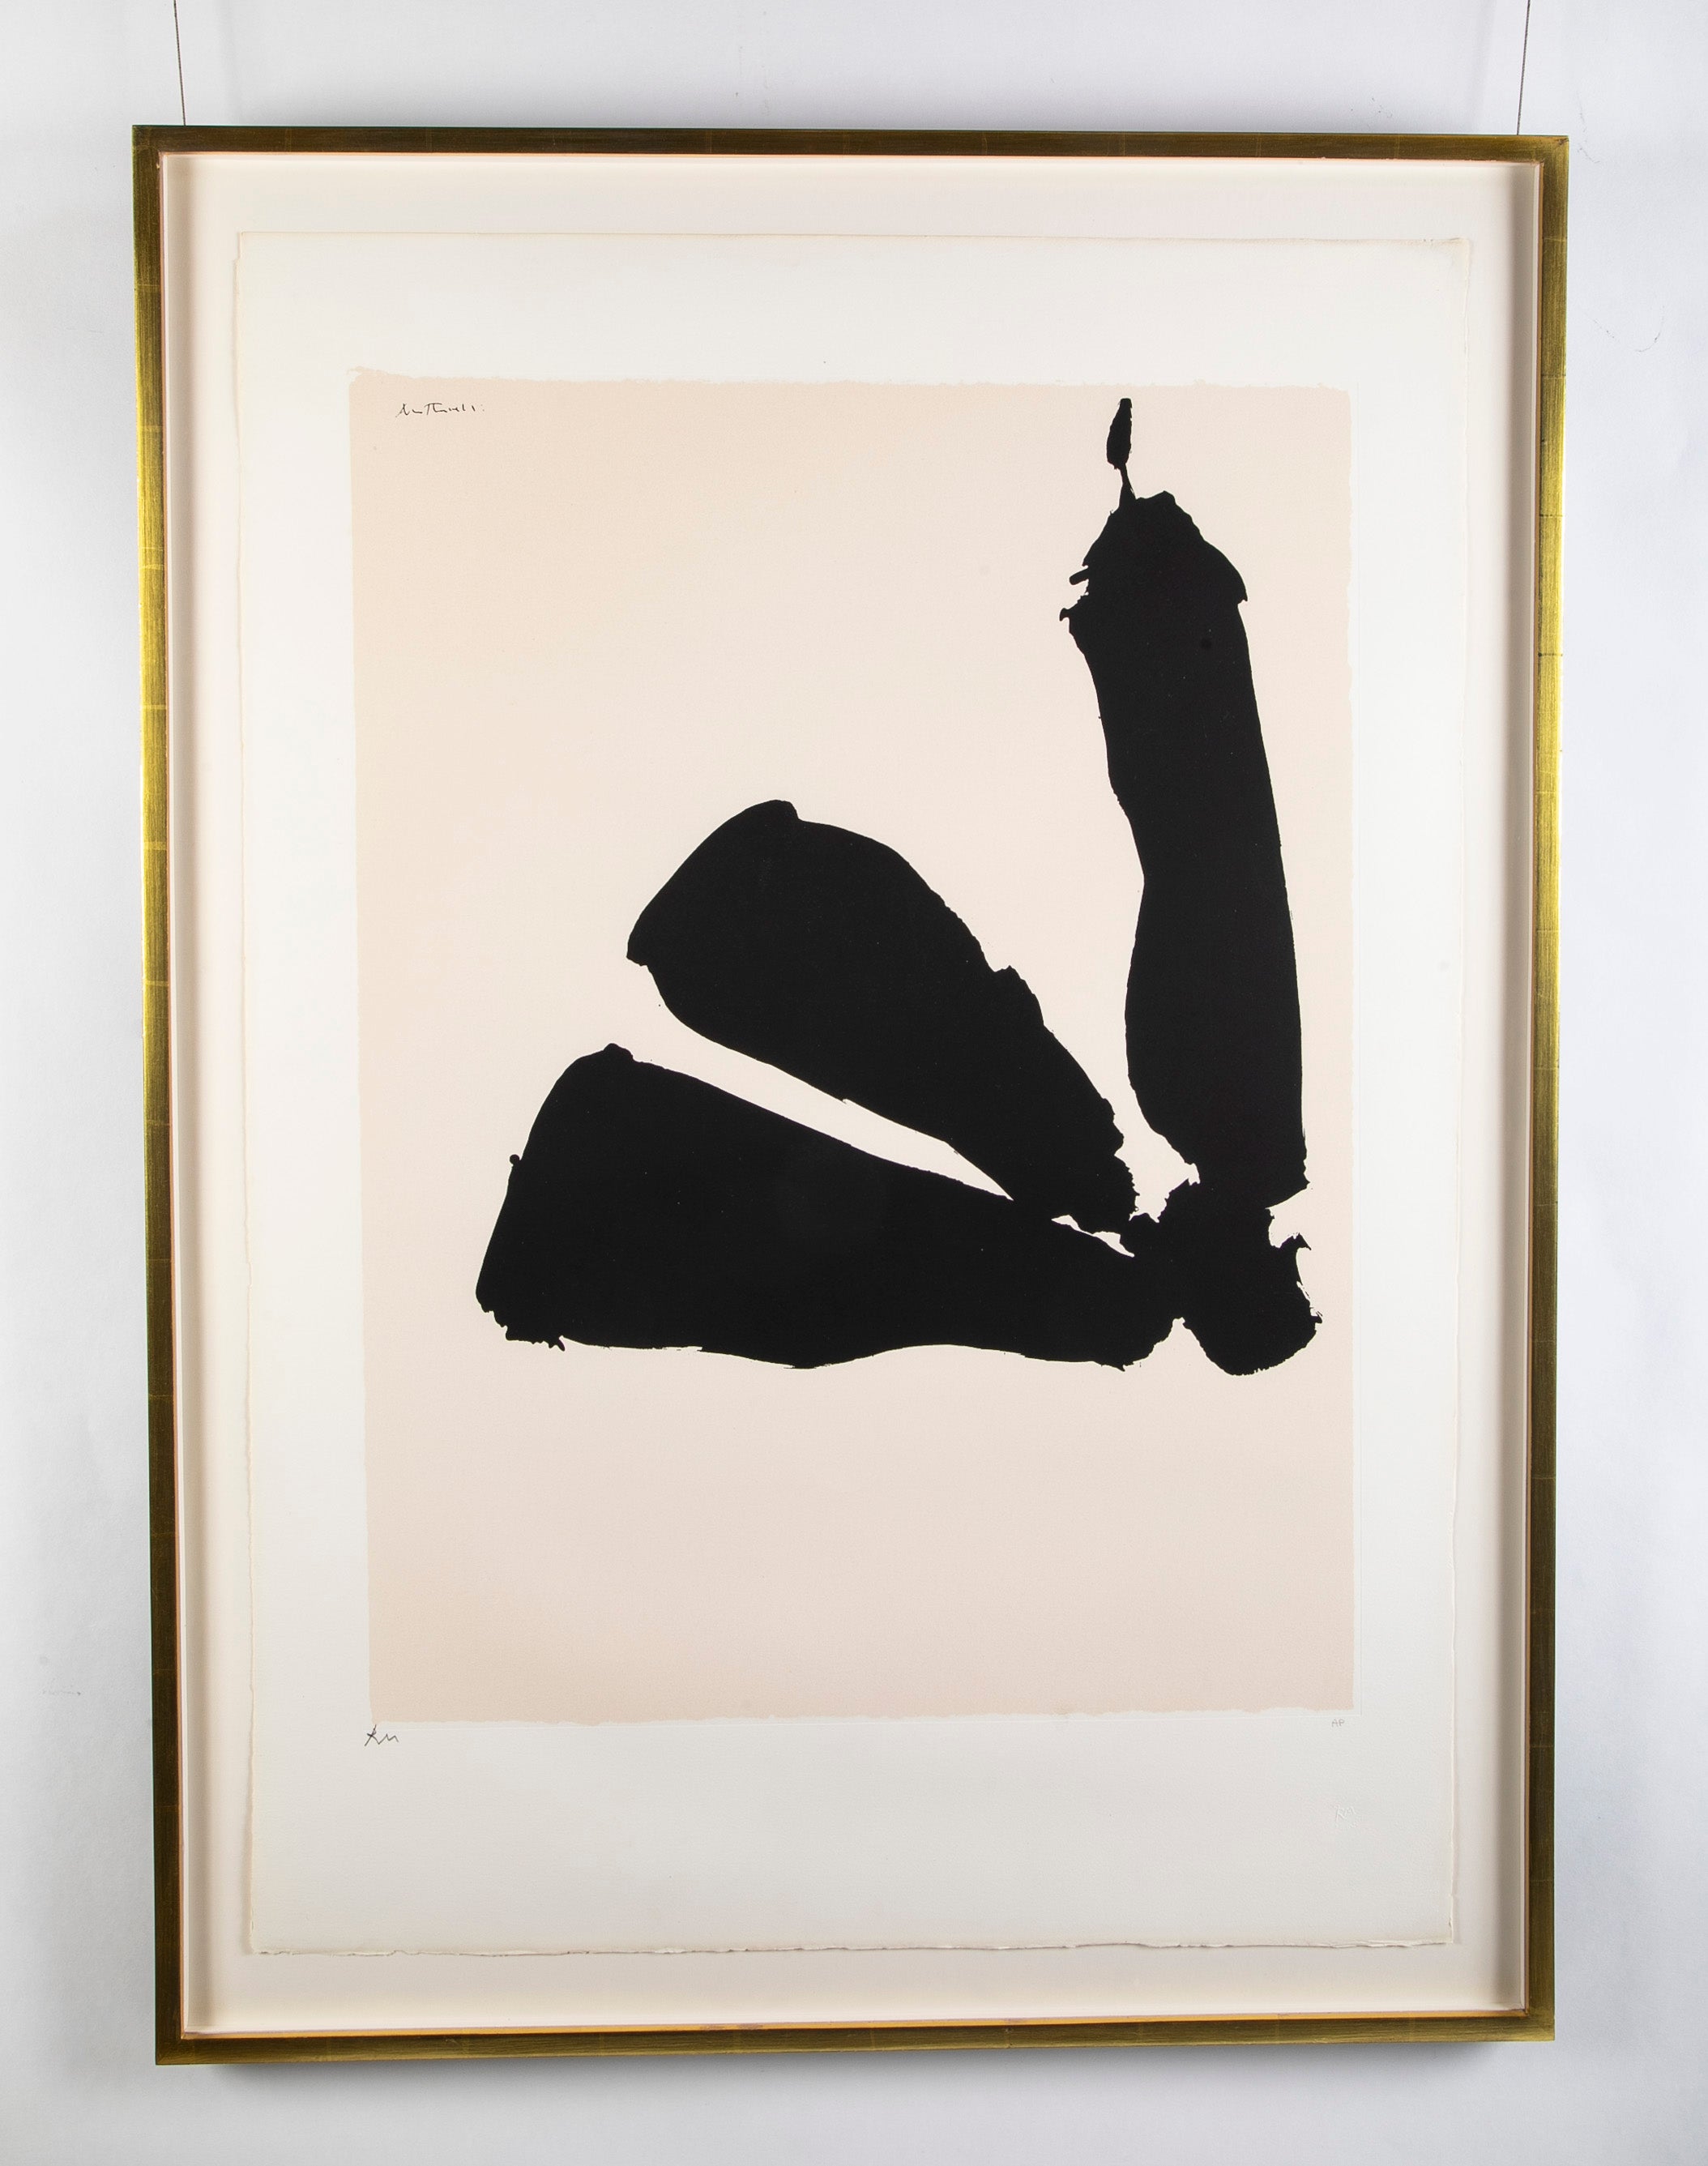 "Africa Suite 8" by Robert Motherwell